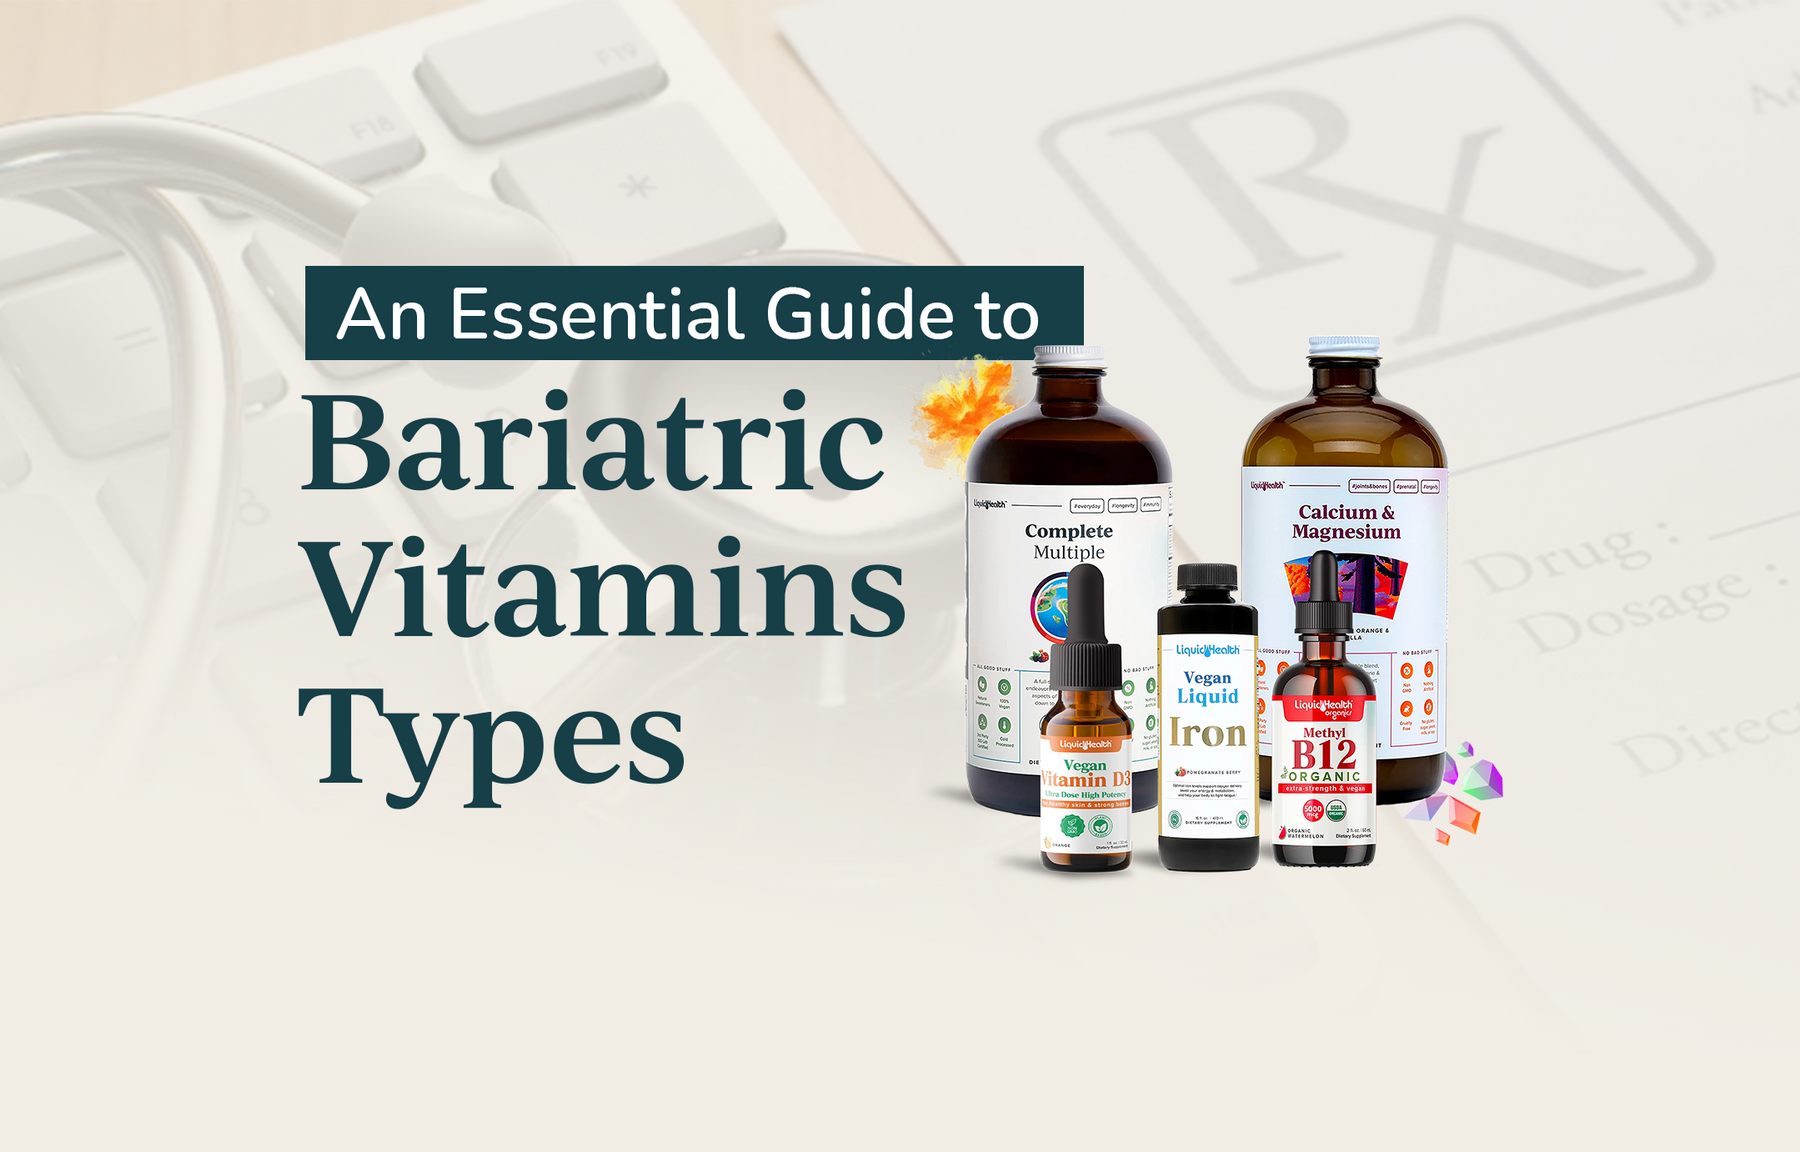 An Essential Guide to Bariatric Vitamins Types